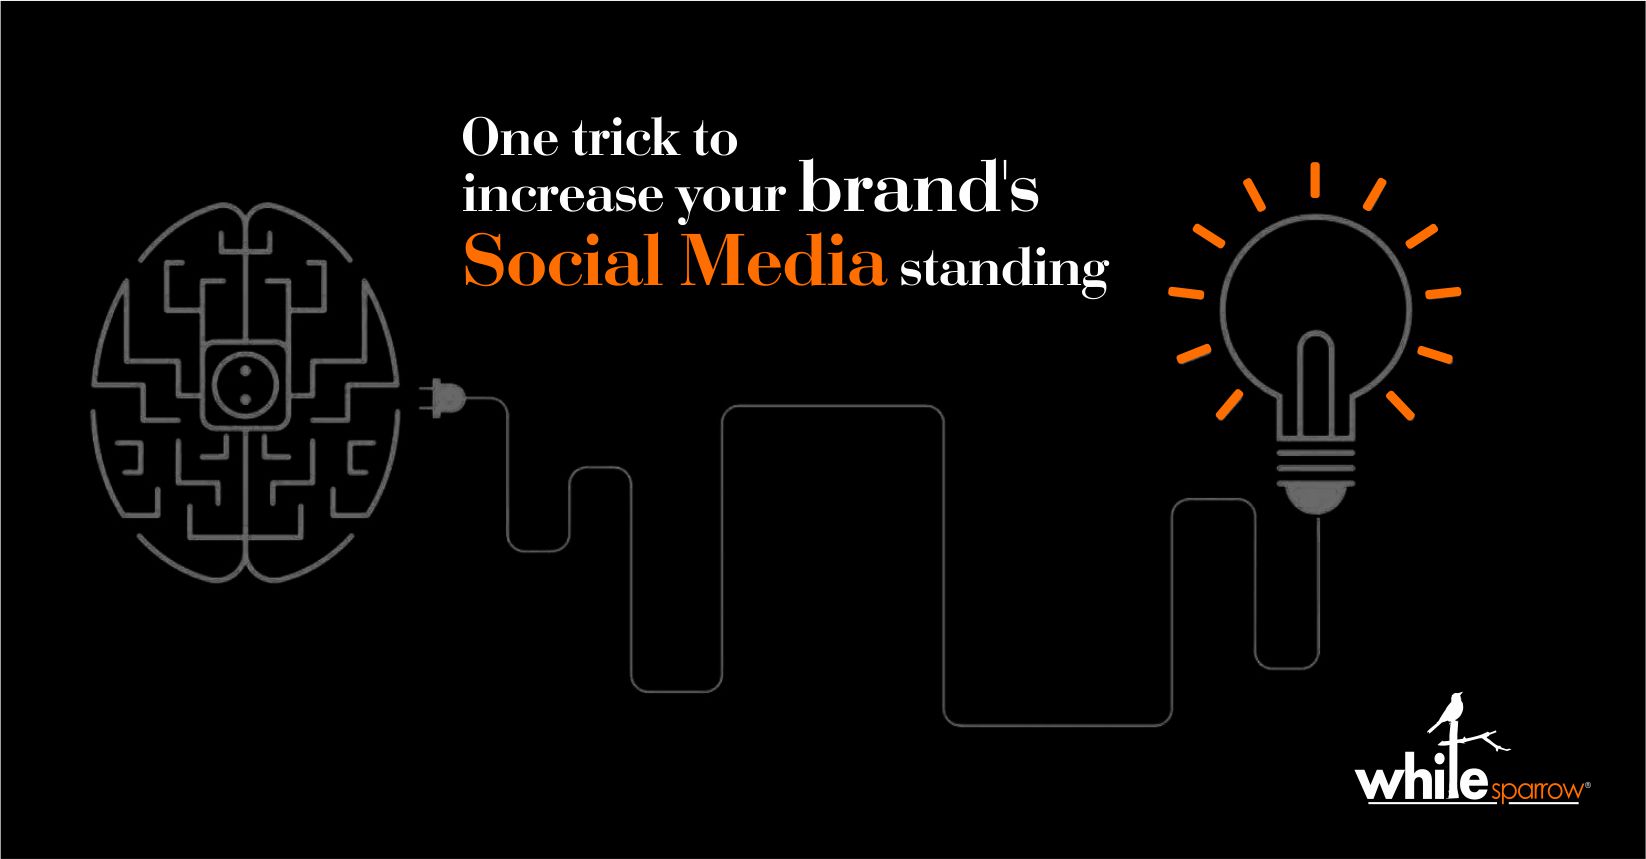 One trick to increase your brand’s social media standing